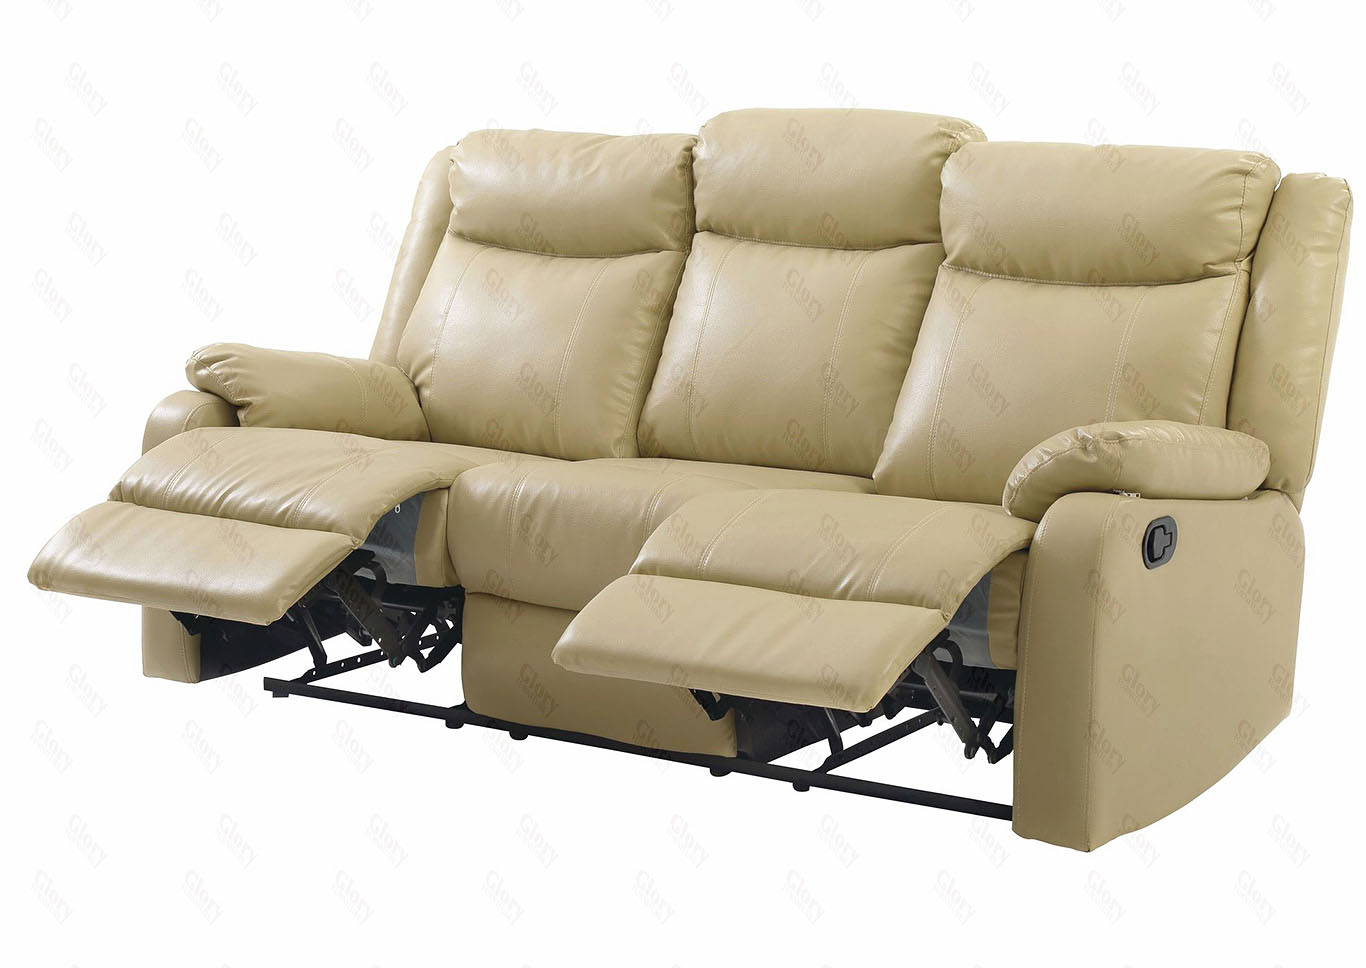 Putty Faux Leather Double Reclining Sofa,Glory Furniture